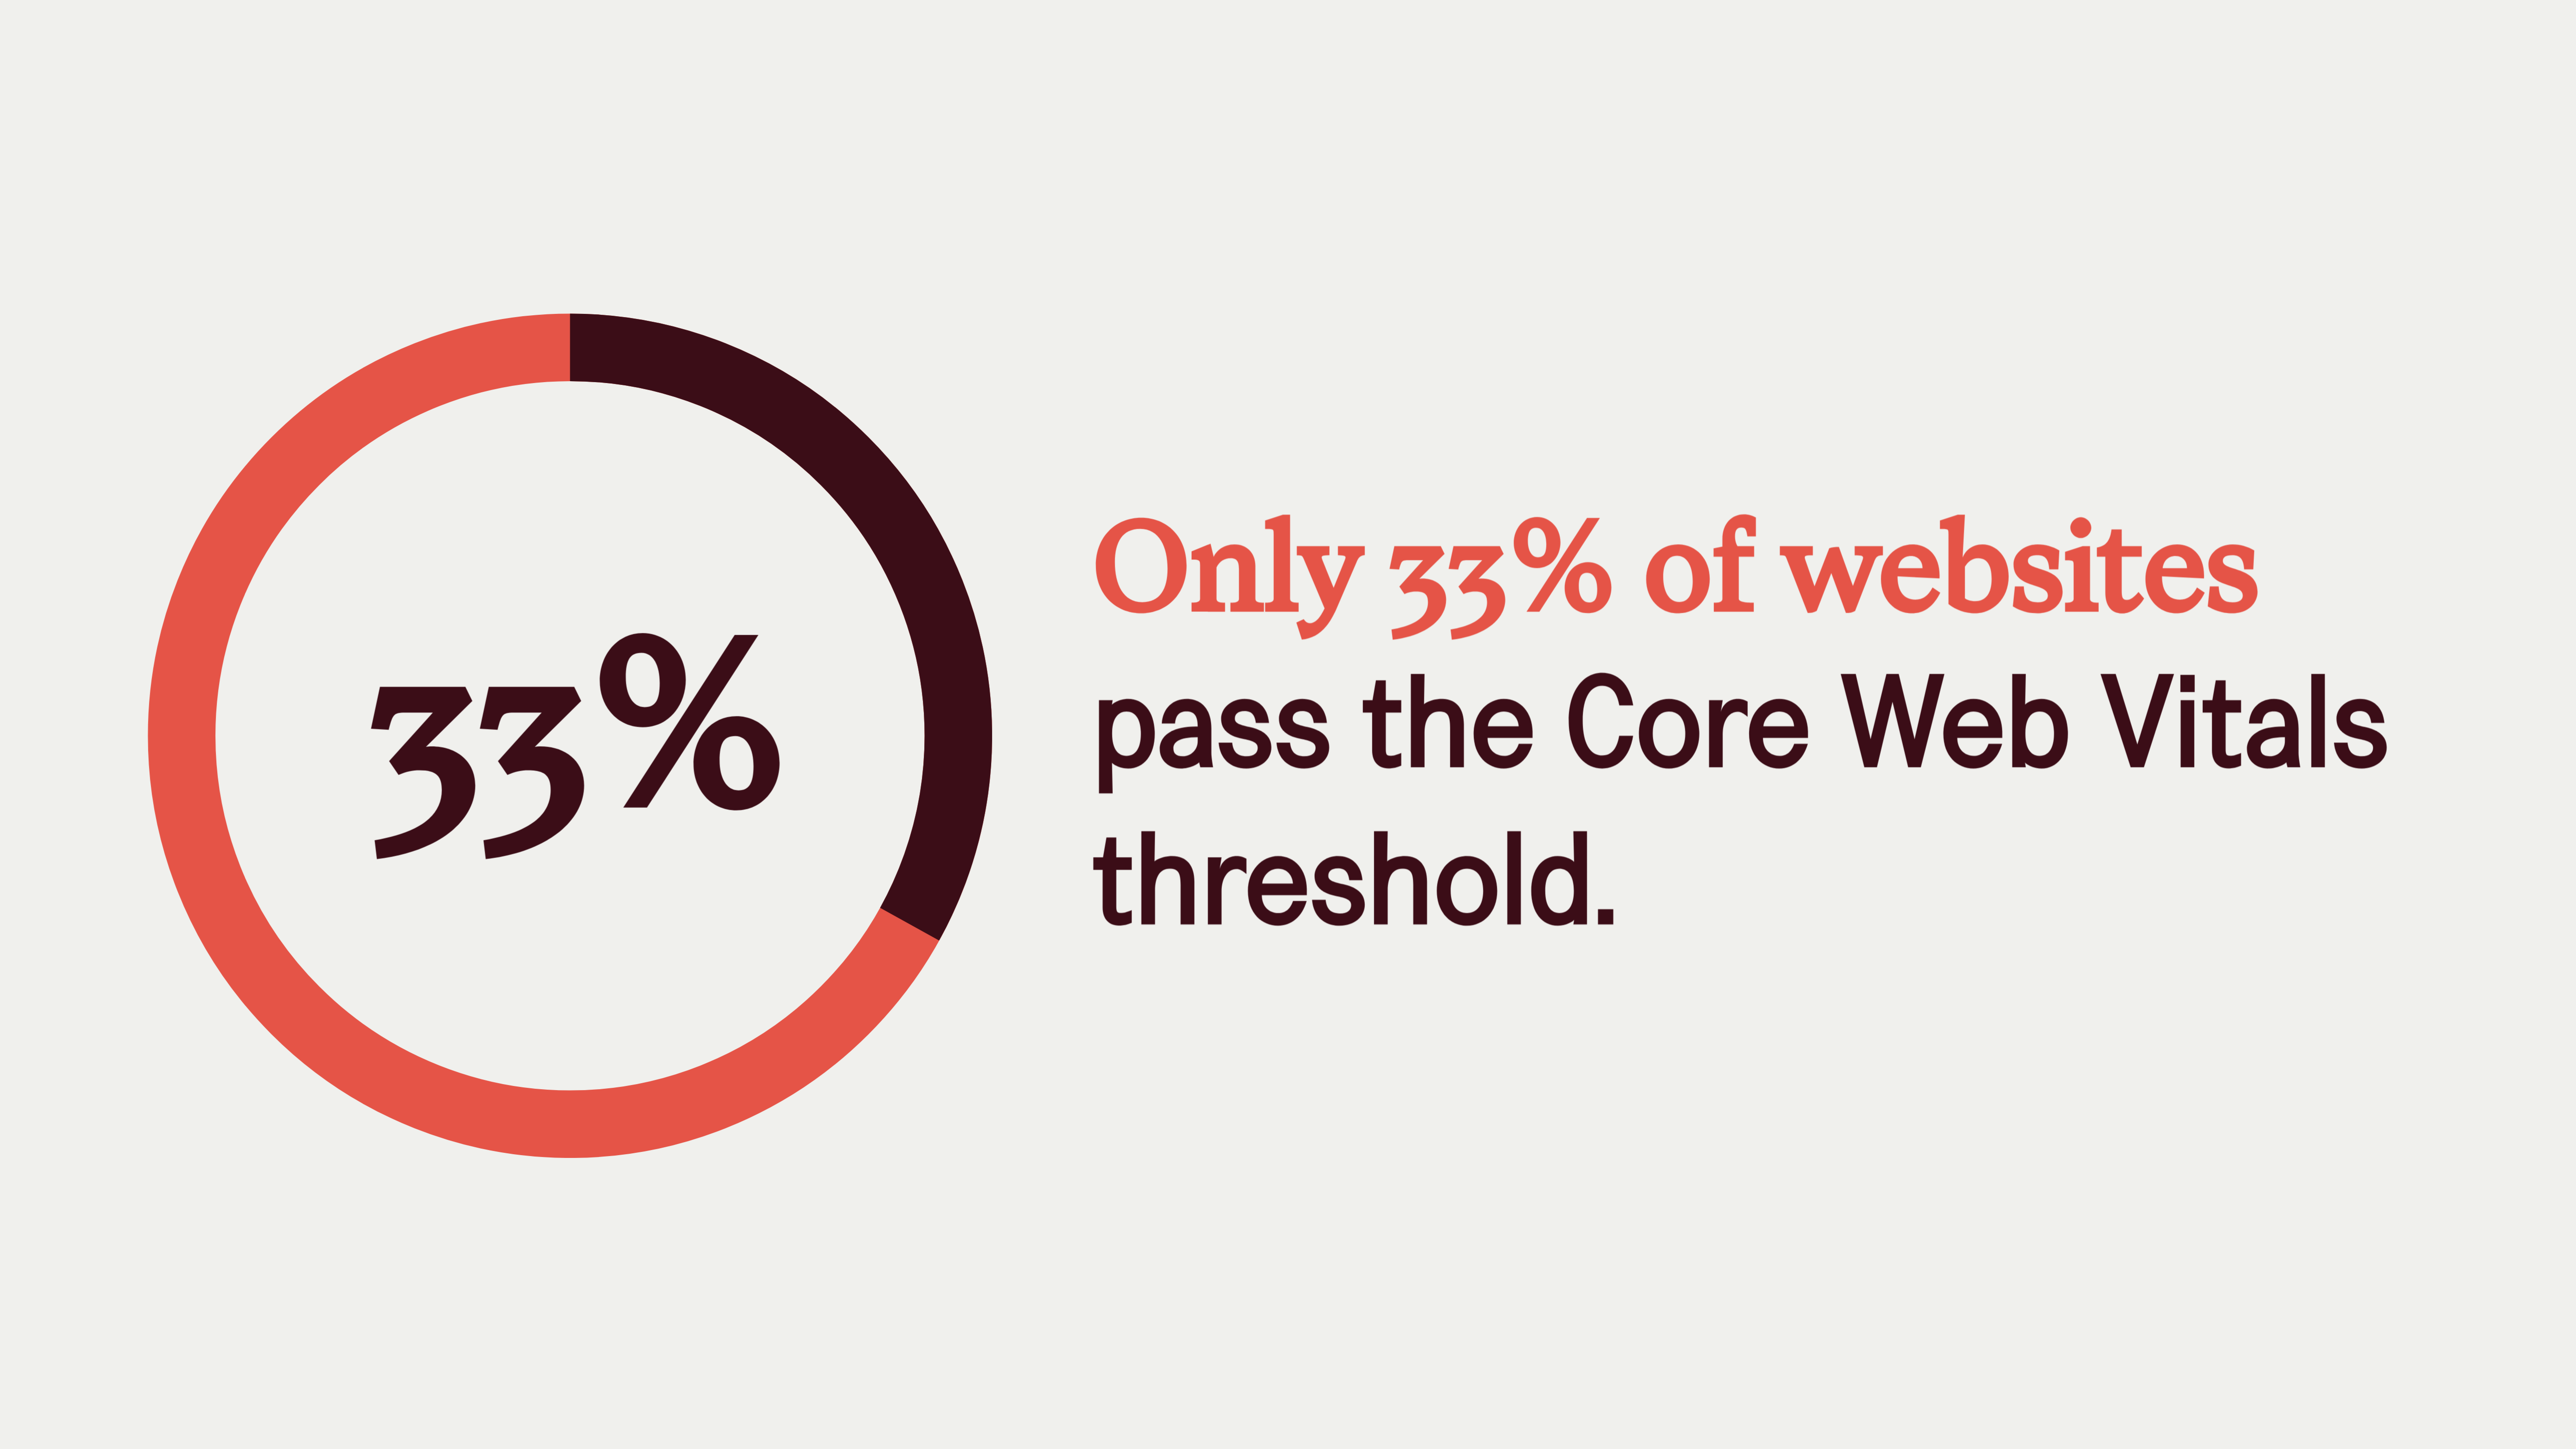 SEO stat reading "Only 33% of websites pass the Core Web Vitals threshold (Ahrefs, 2022)."